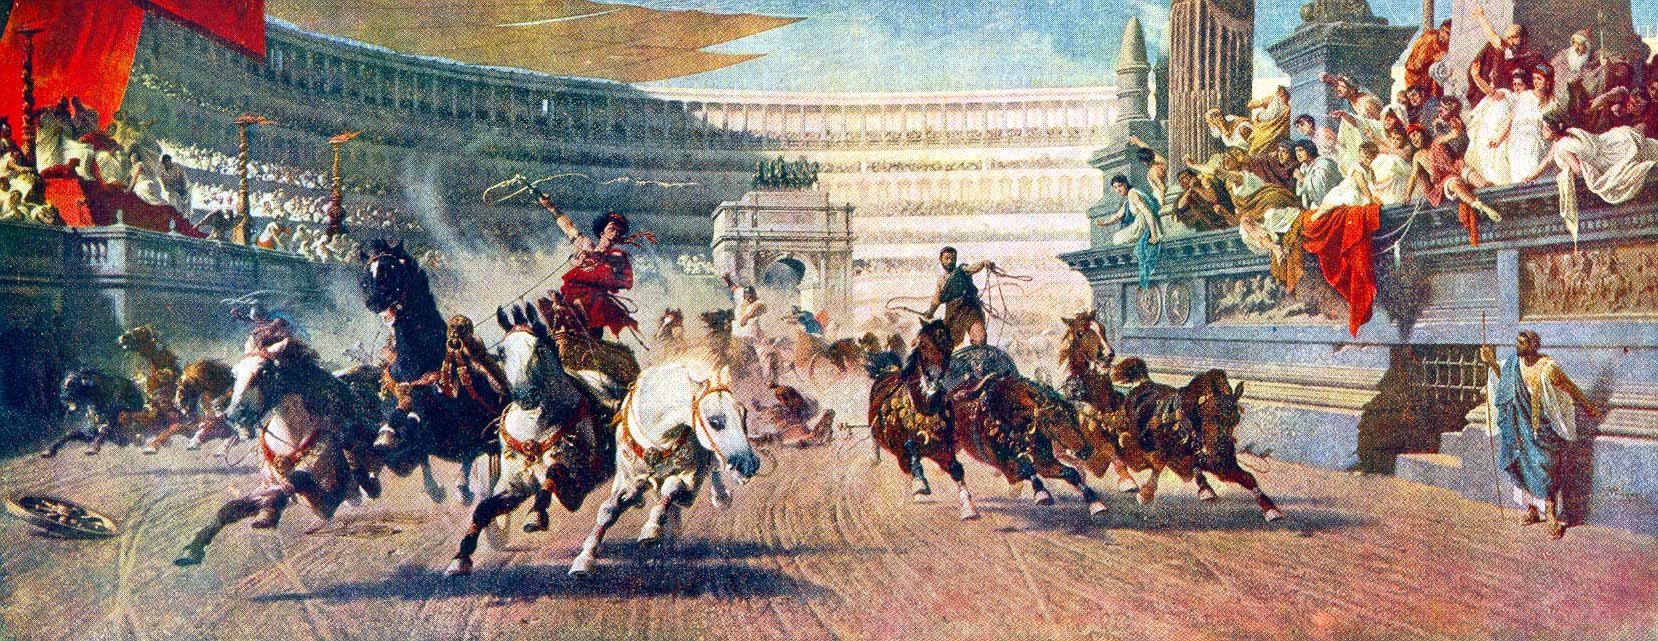 where were chariot races held in ancient rome